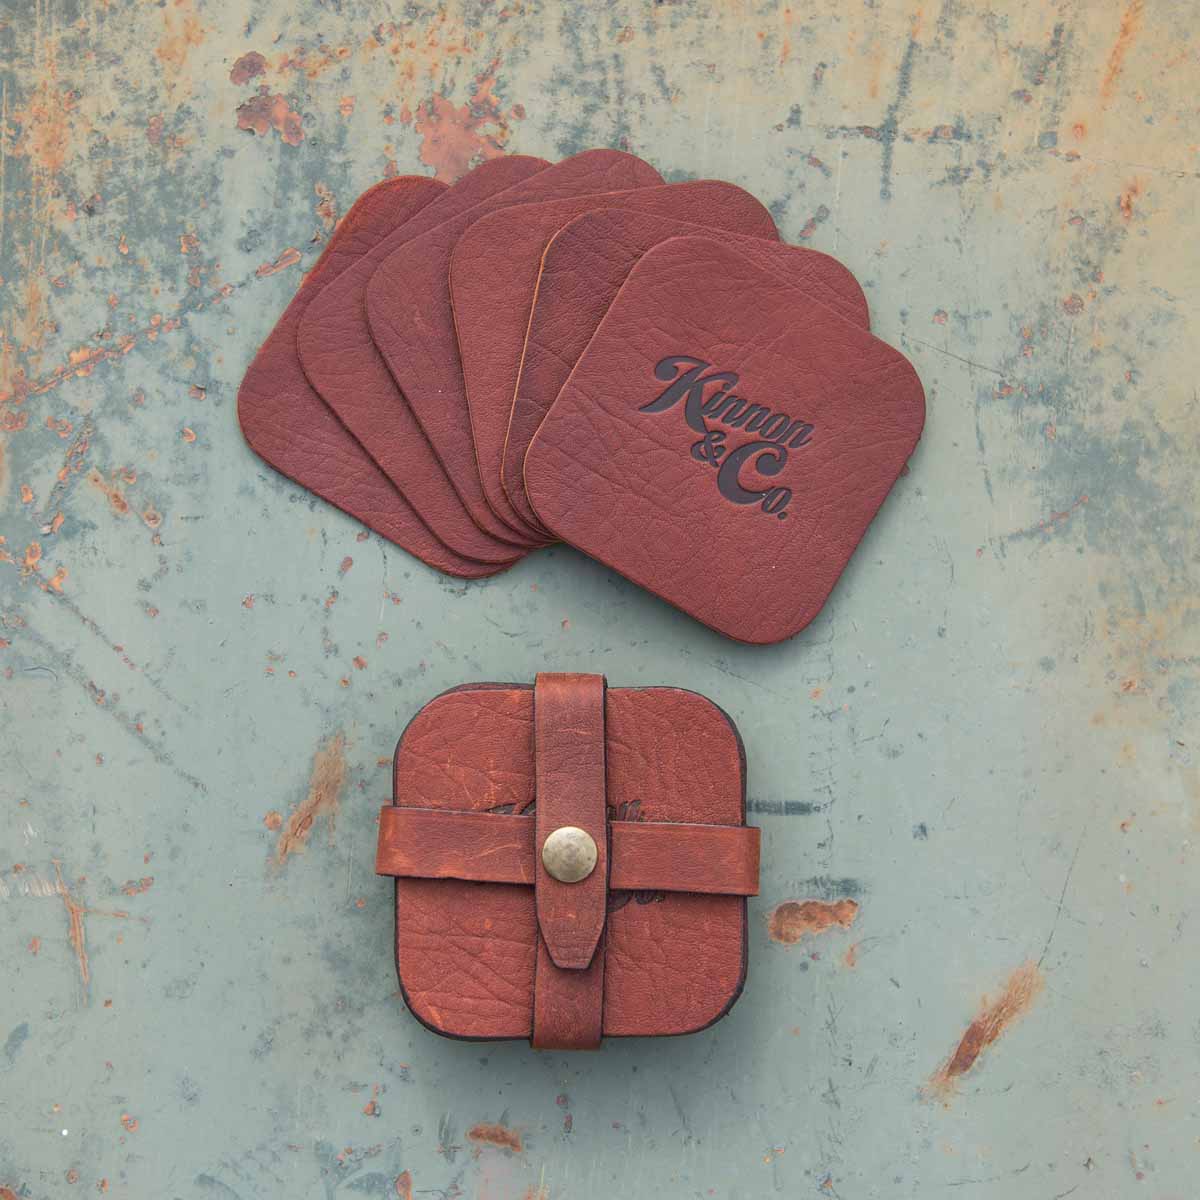 Pack of 6 Kinnon and Co branded leather coasters with strap